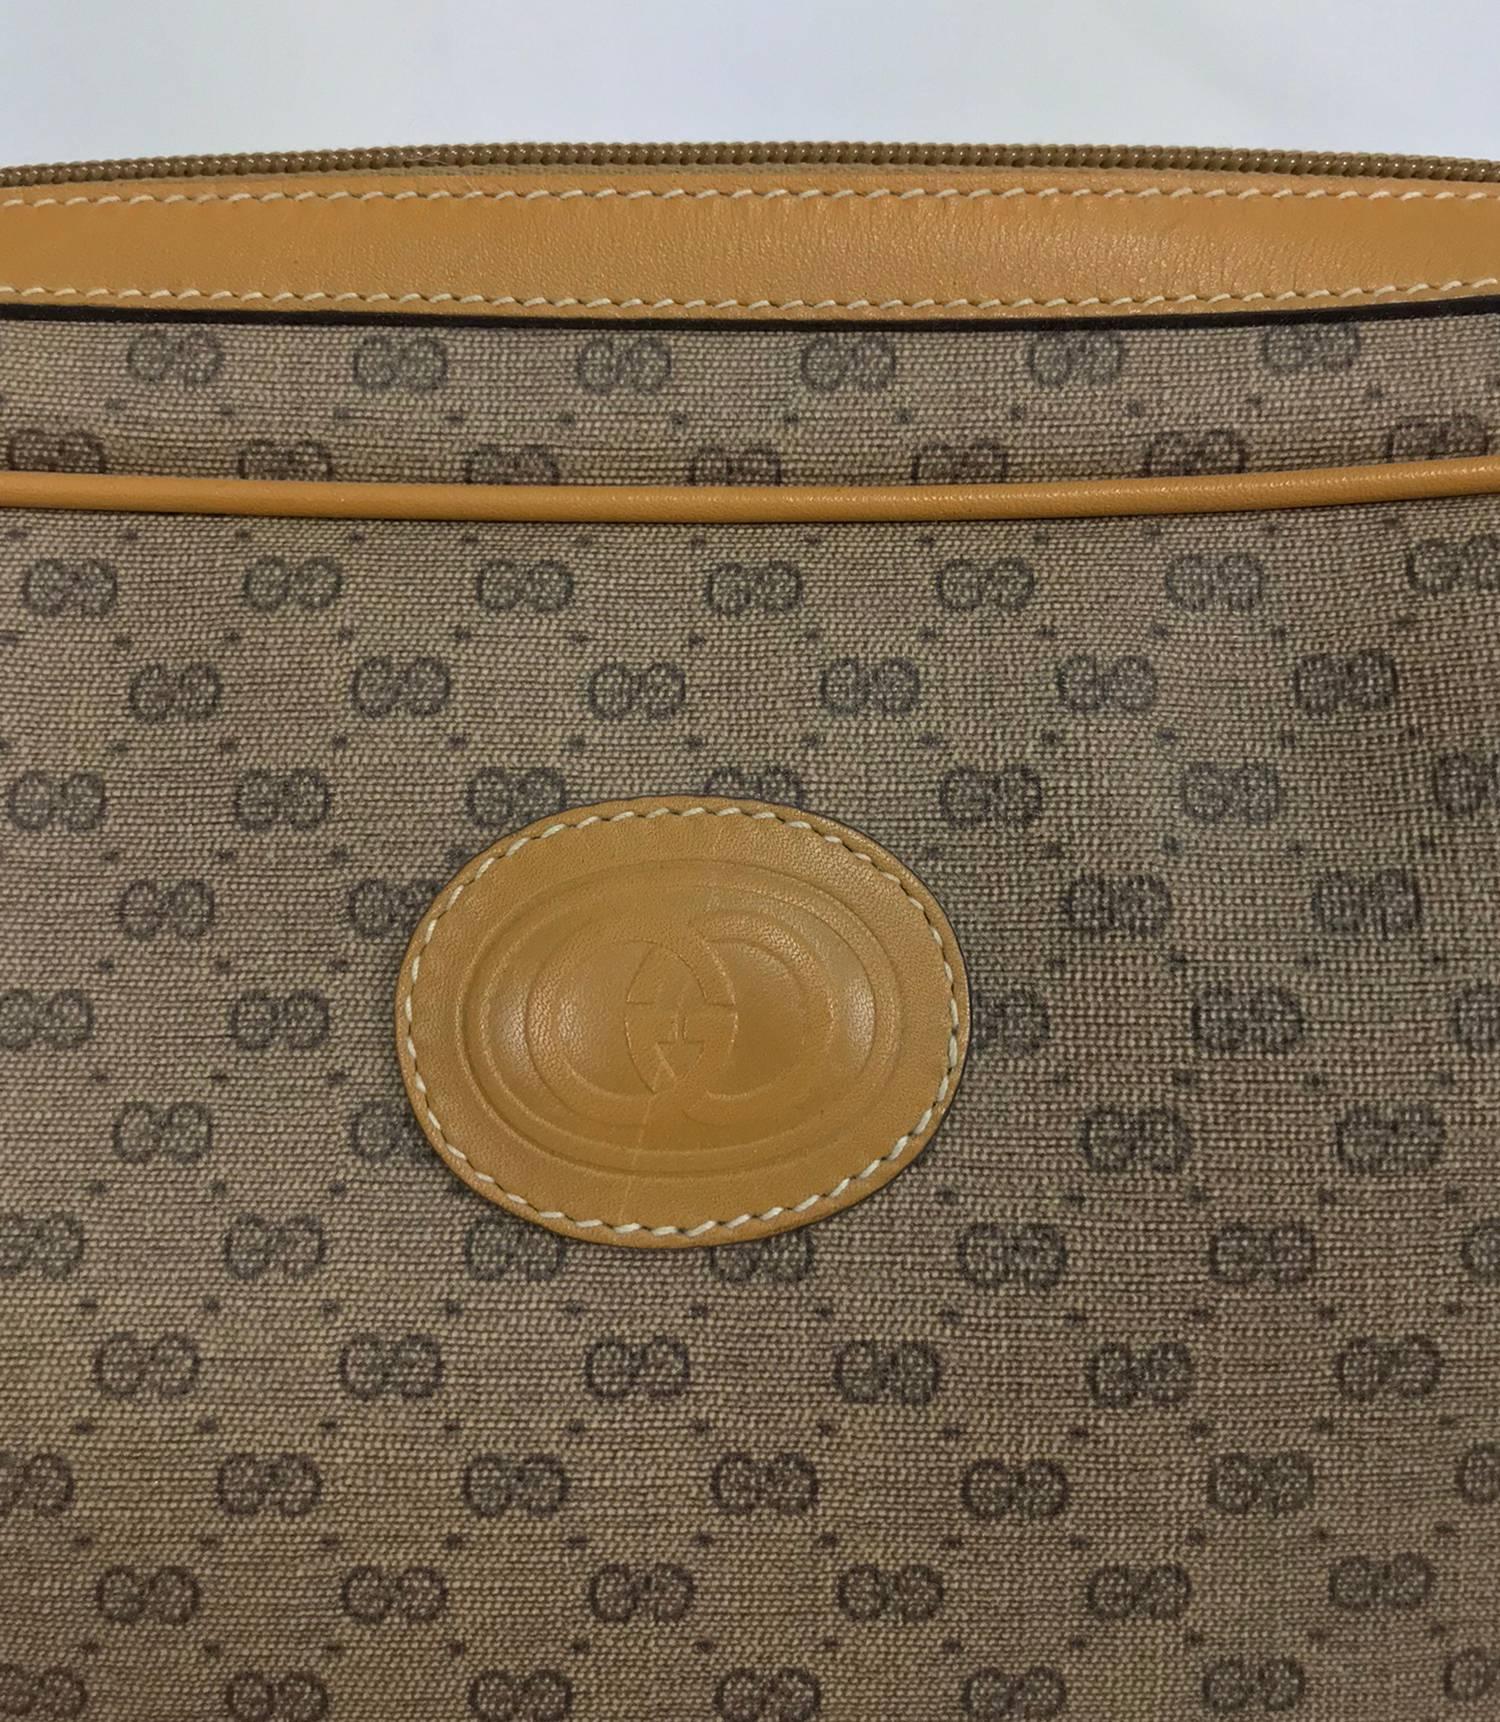 Vintage Gucci logo coated canvas and leather clutch 1980...Tan with dark brown Gucci logo print. This bag closes at the top with a zipper and Gucci leather tab. Open compartment inside, fully lined inside, lining has a couple of scratches but